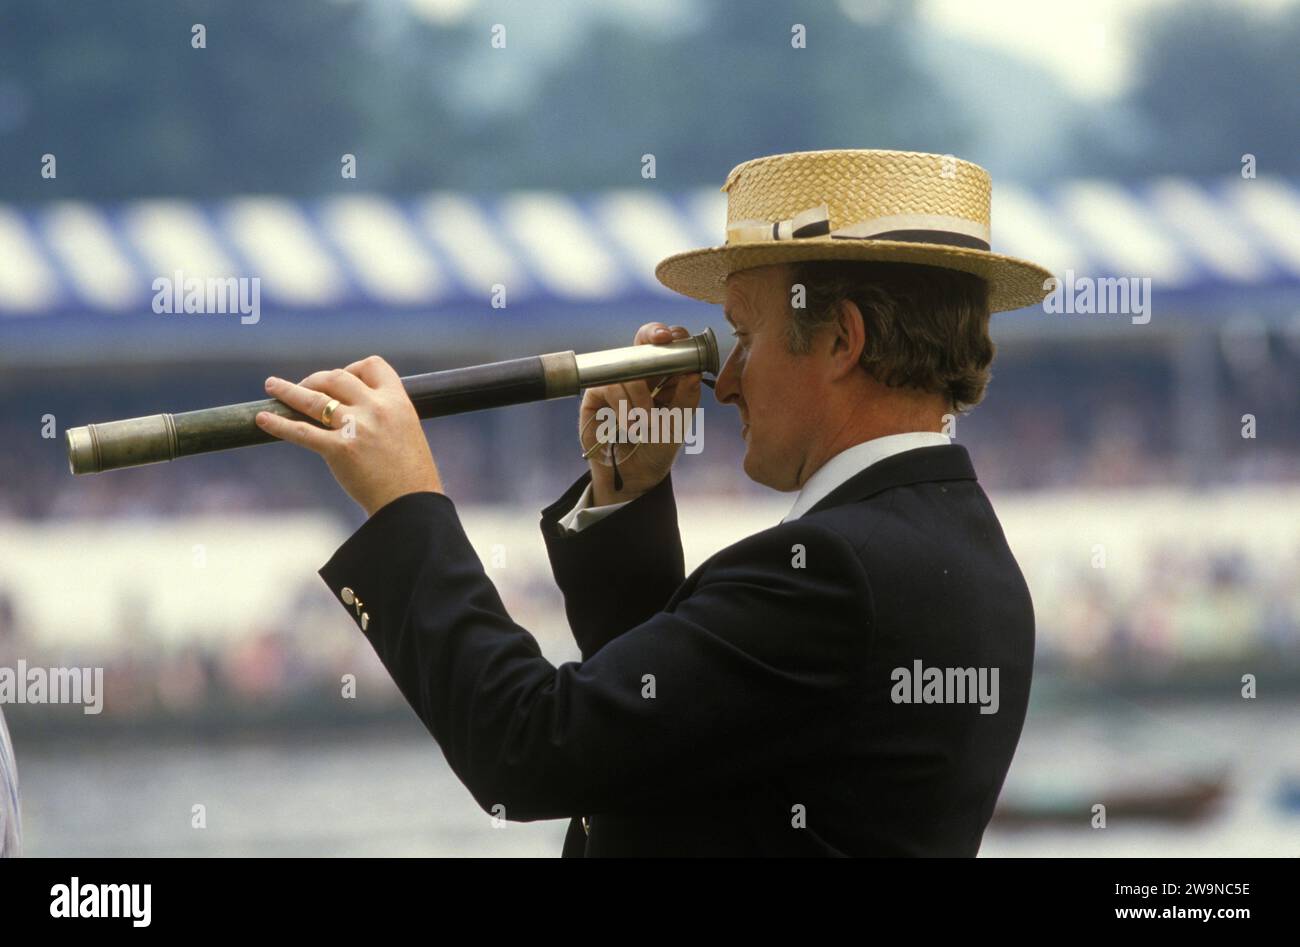 Henley Royal Rowing Regatta. A gent in a straw boater watching the racing through a telescope. Henley on Thames, Oxfordshire, England July 1985 1980s UK HOMER SYKES Stock Photo